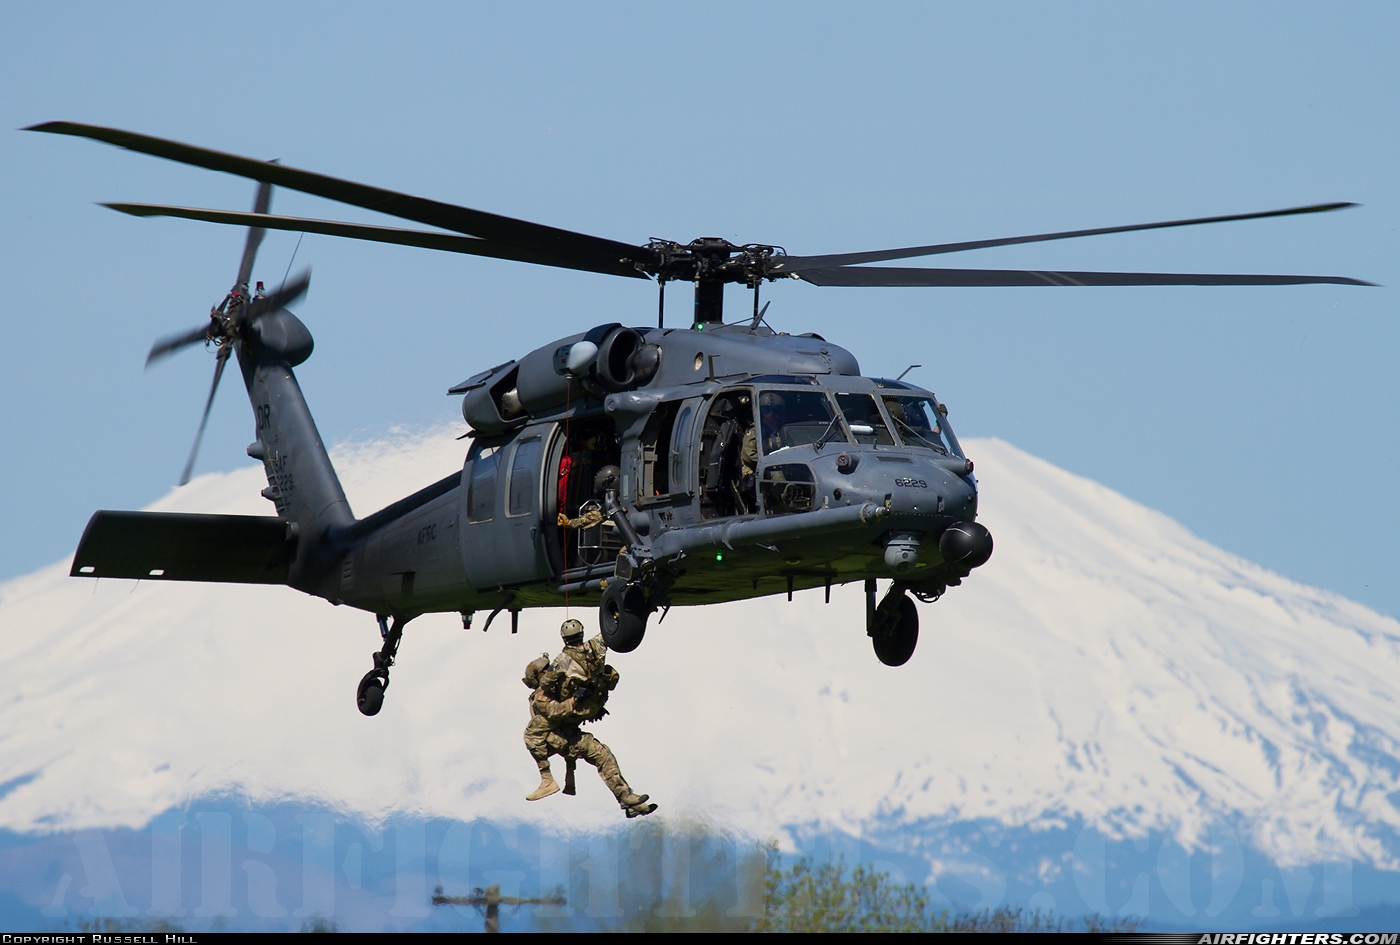 USA - Air Force Sikorsky HH-60G Pave Hawk (S-70A) 90-26229 at Off-Airport - Vancouver Lake, USA